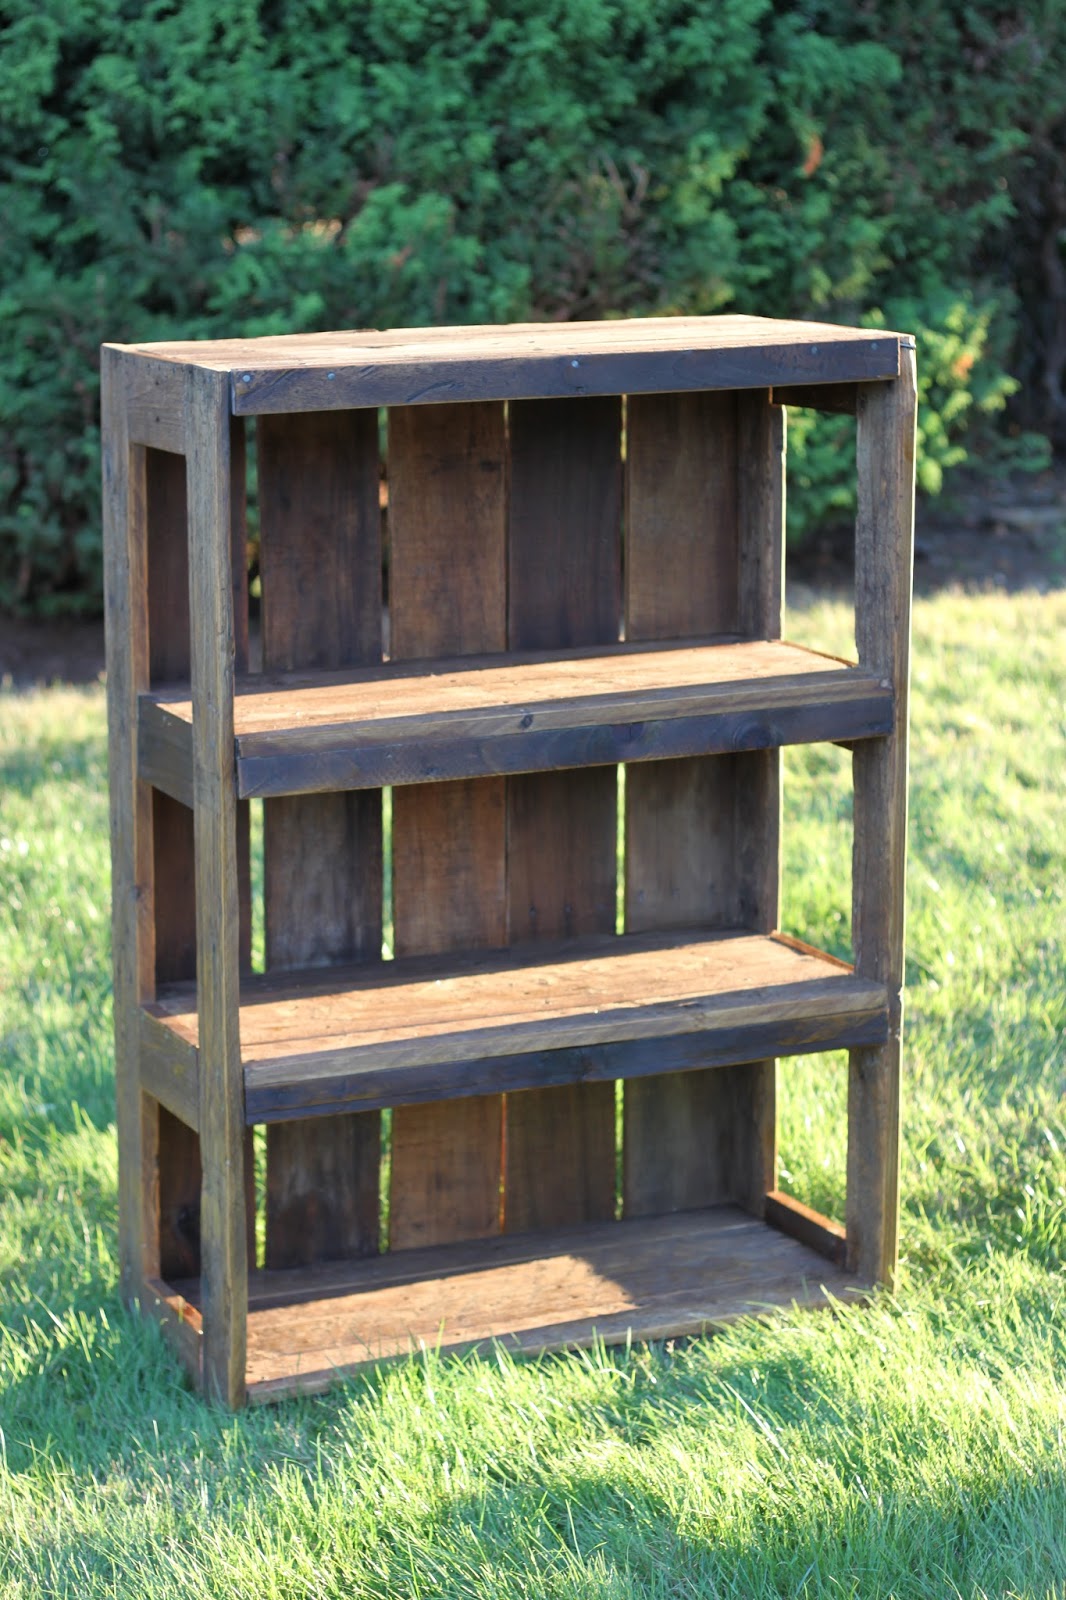 Made with Love that Can be Felt : DIY Pallet Bookshelf 